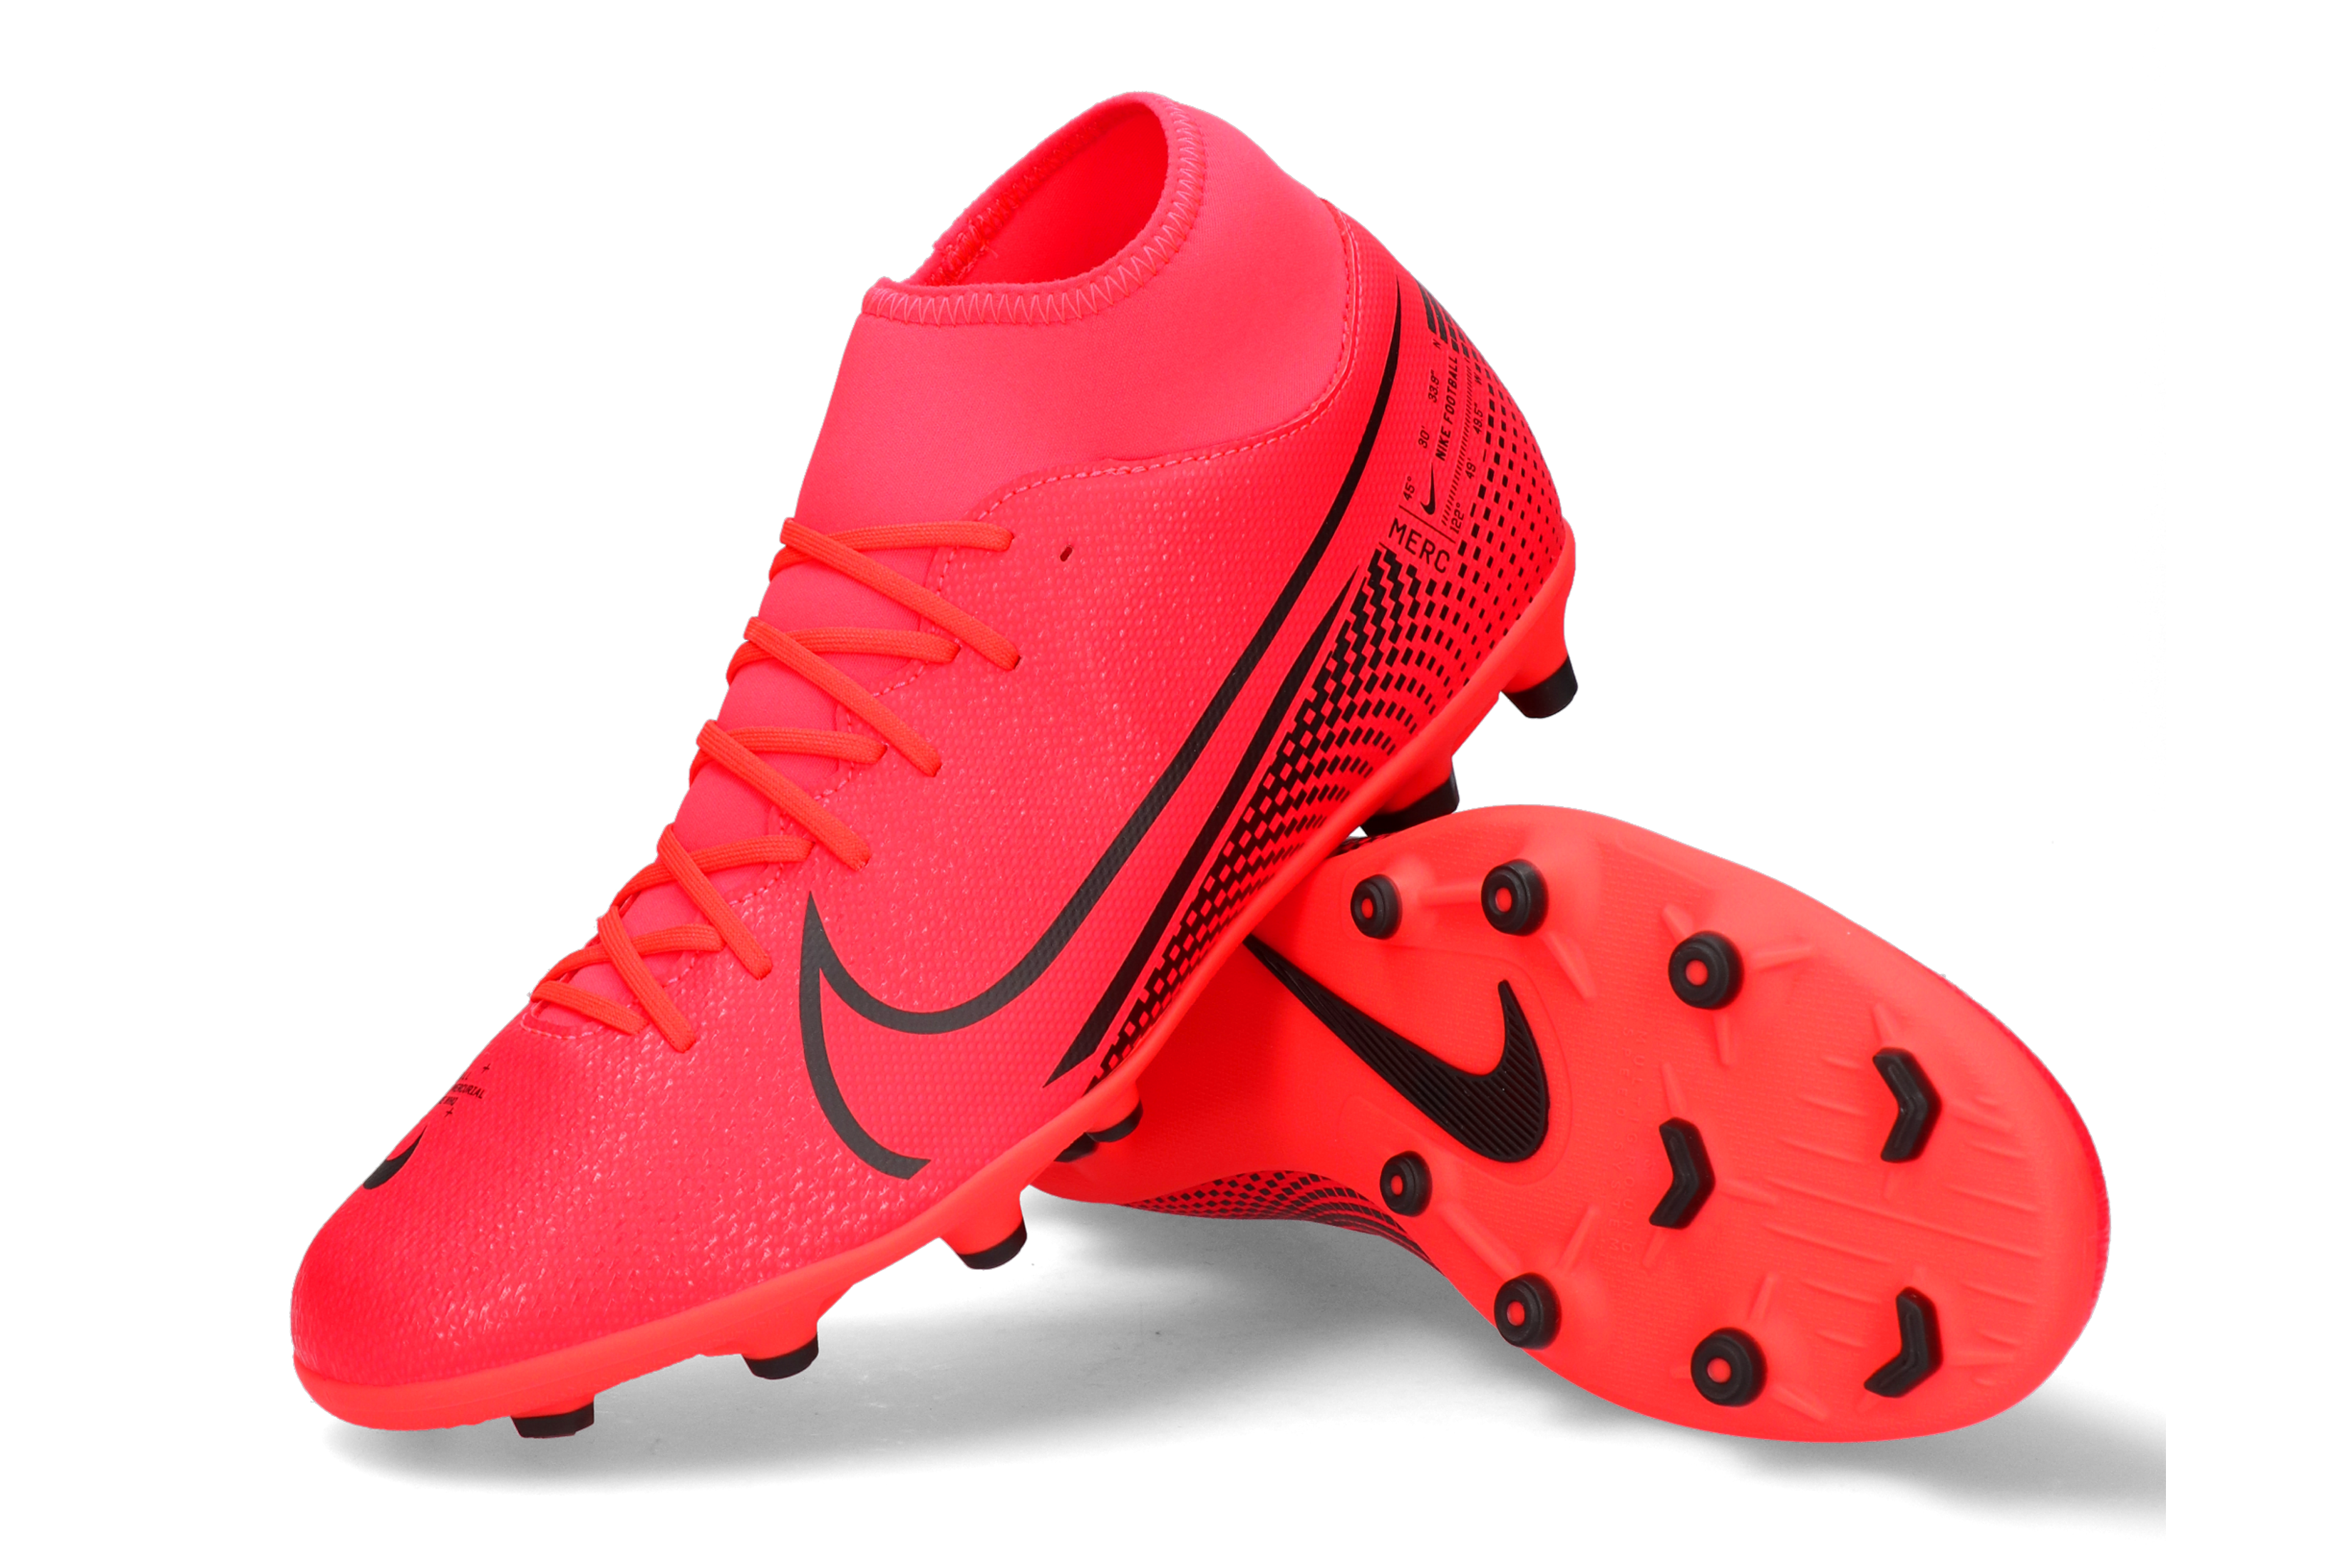 Nike Mercurial Superfly 7 Club TF M AT7980 010 football shoes